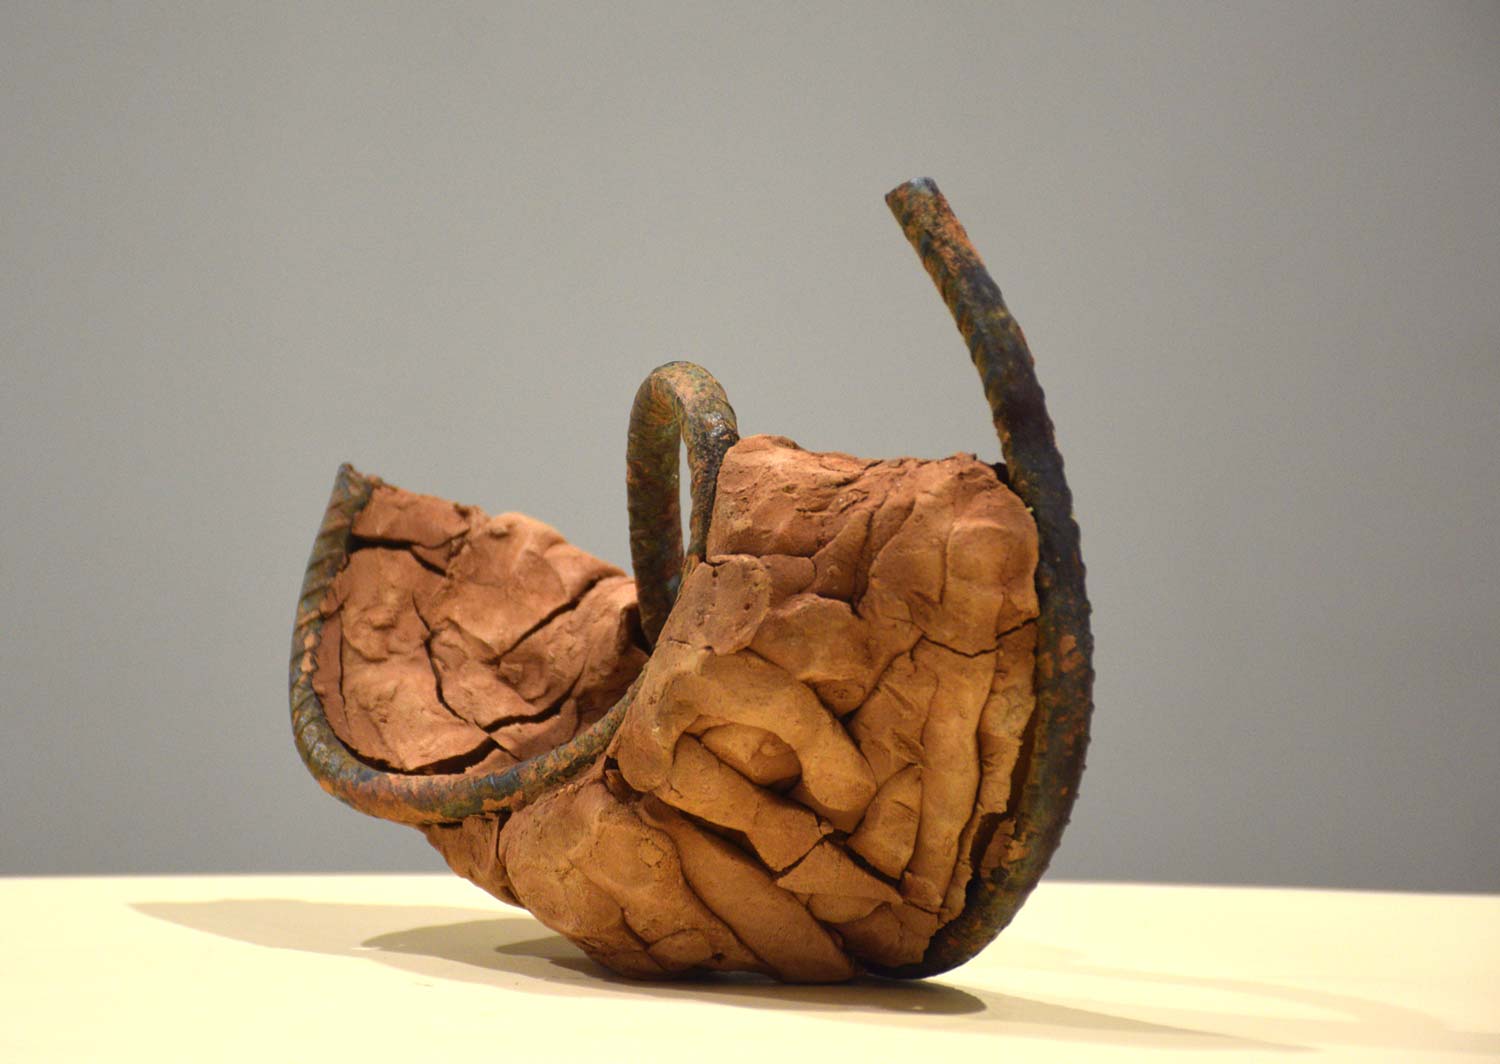 Contemporary Sculpture with Clay"Untitled" art by Vikas Kumar Yadav